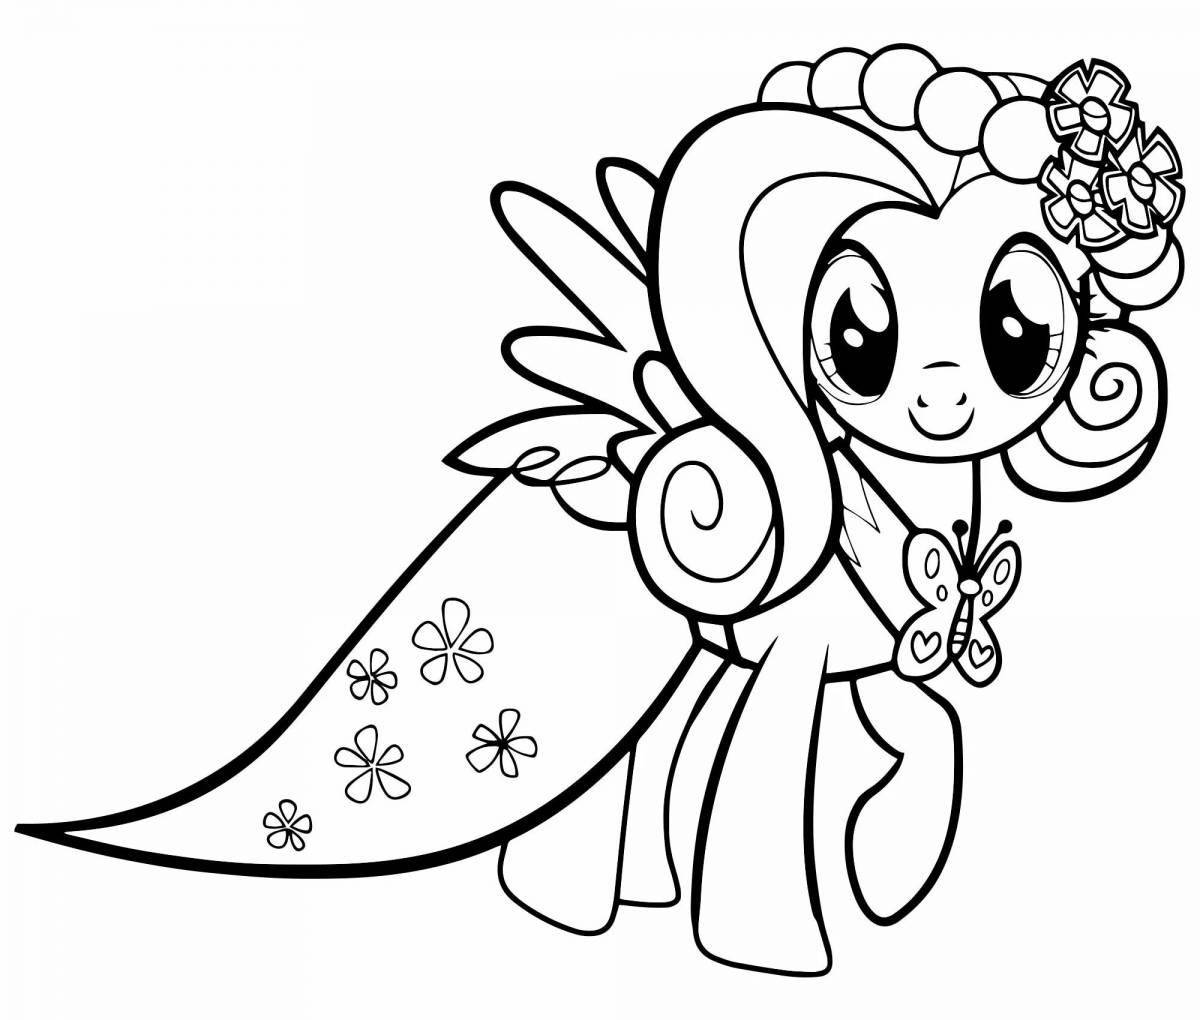 Fairytale coloring for girls cute pony